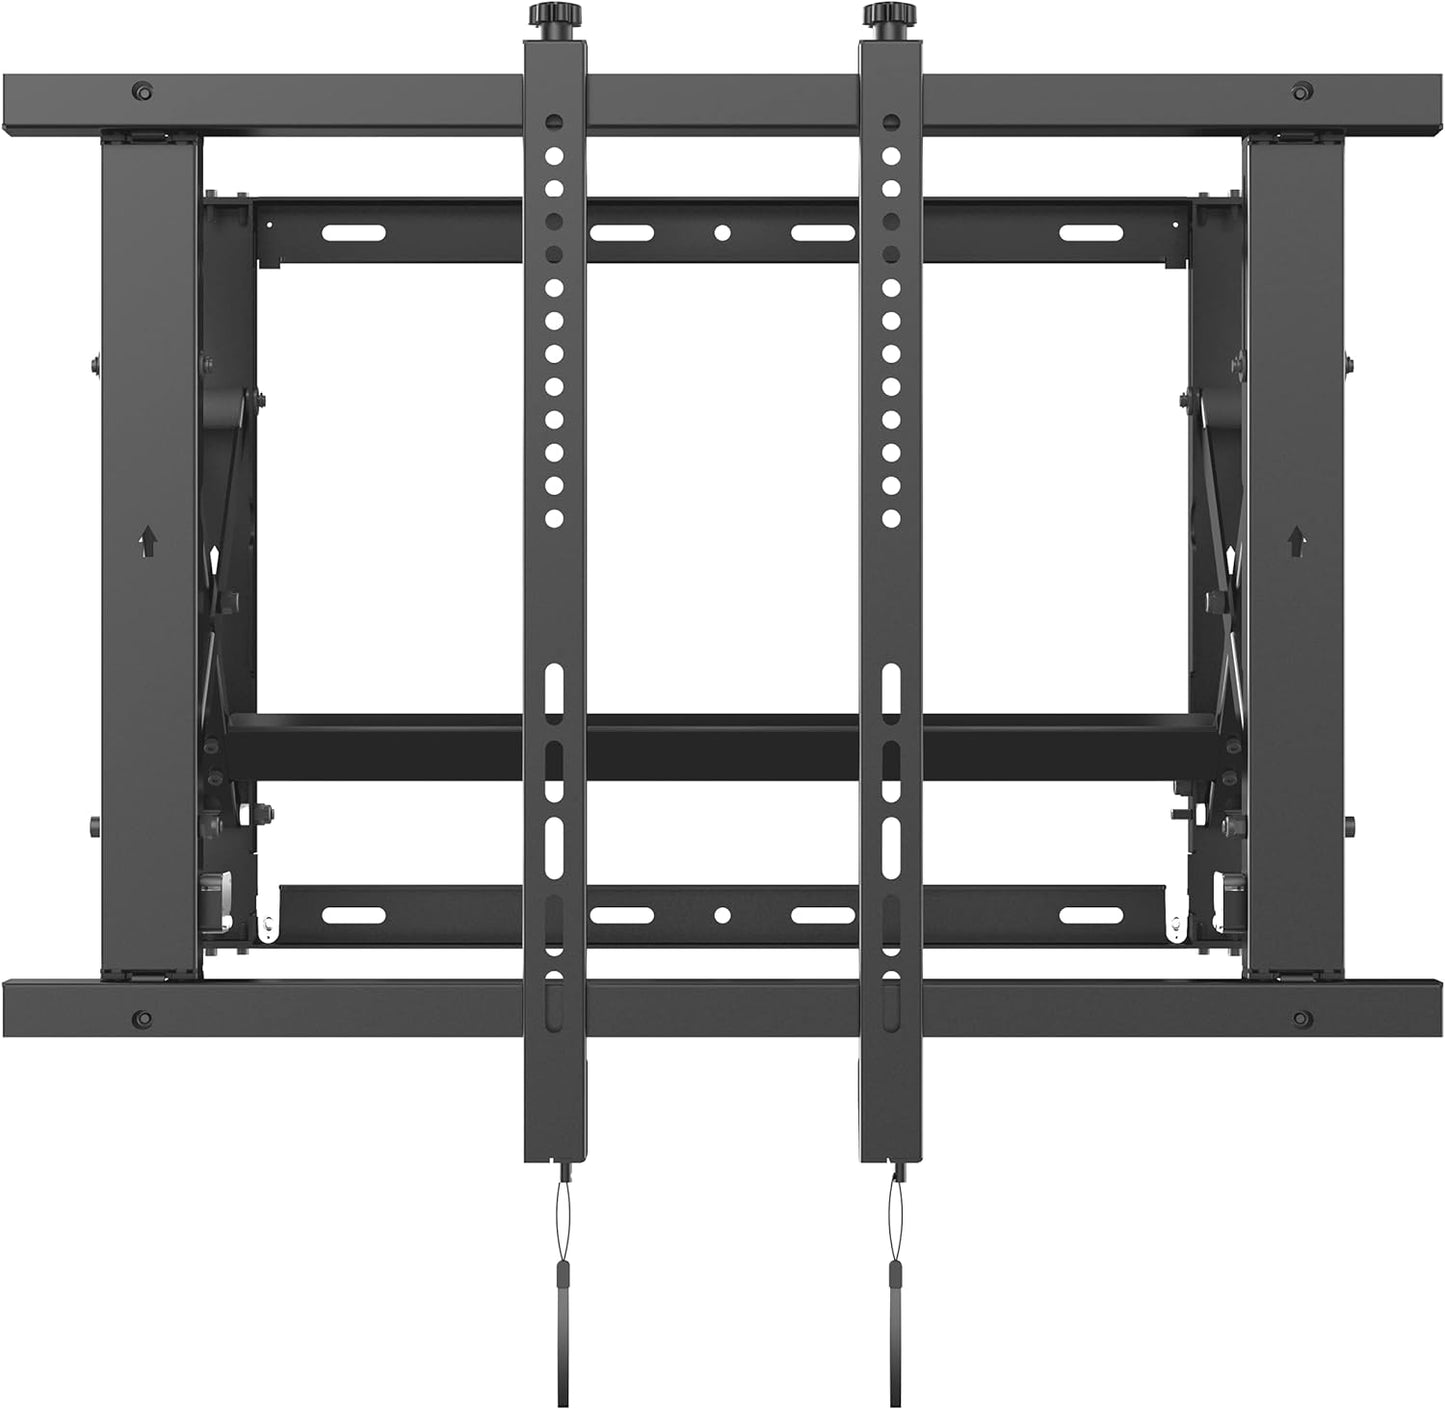 Single Video Wall Rail Mounting System - Pop out brackets with Microadjustments